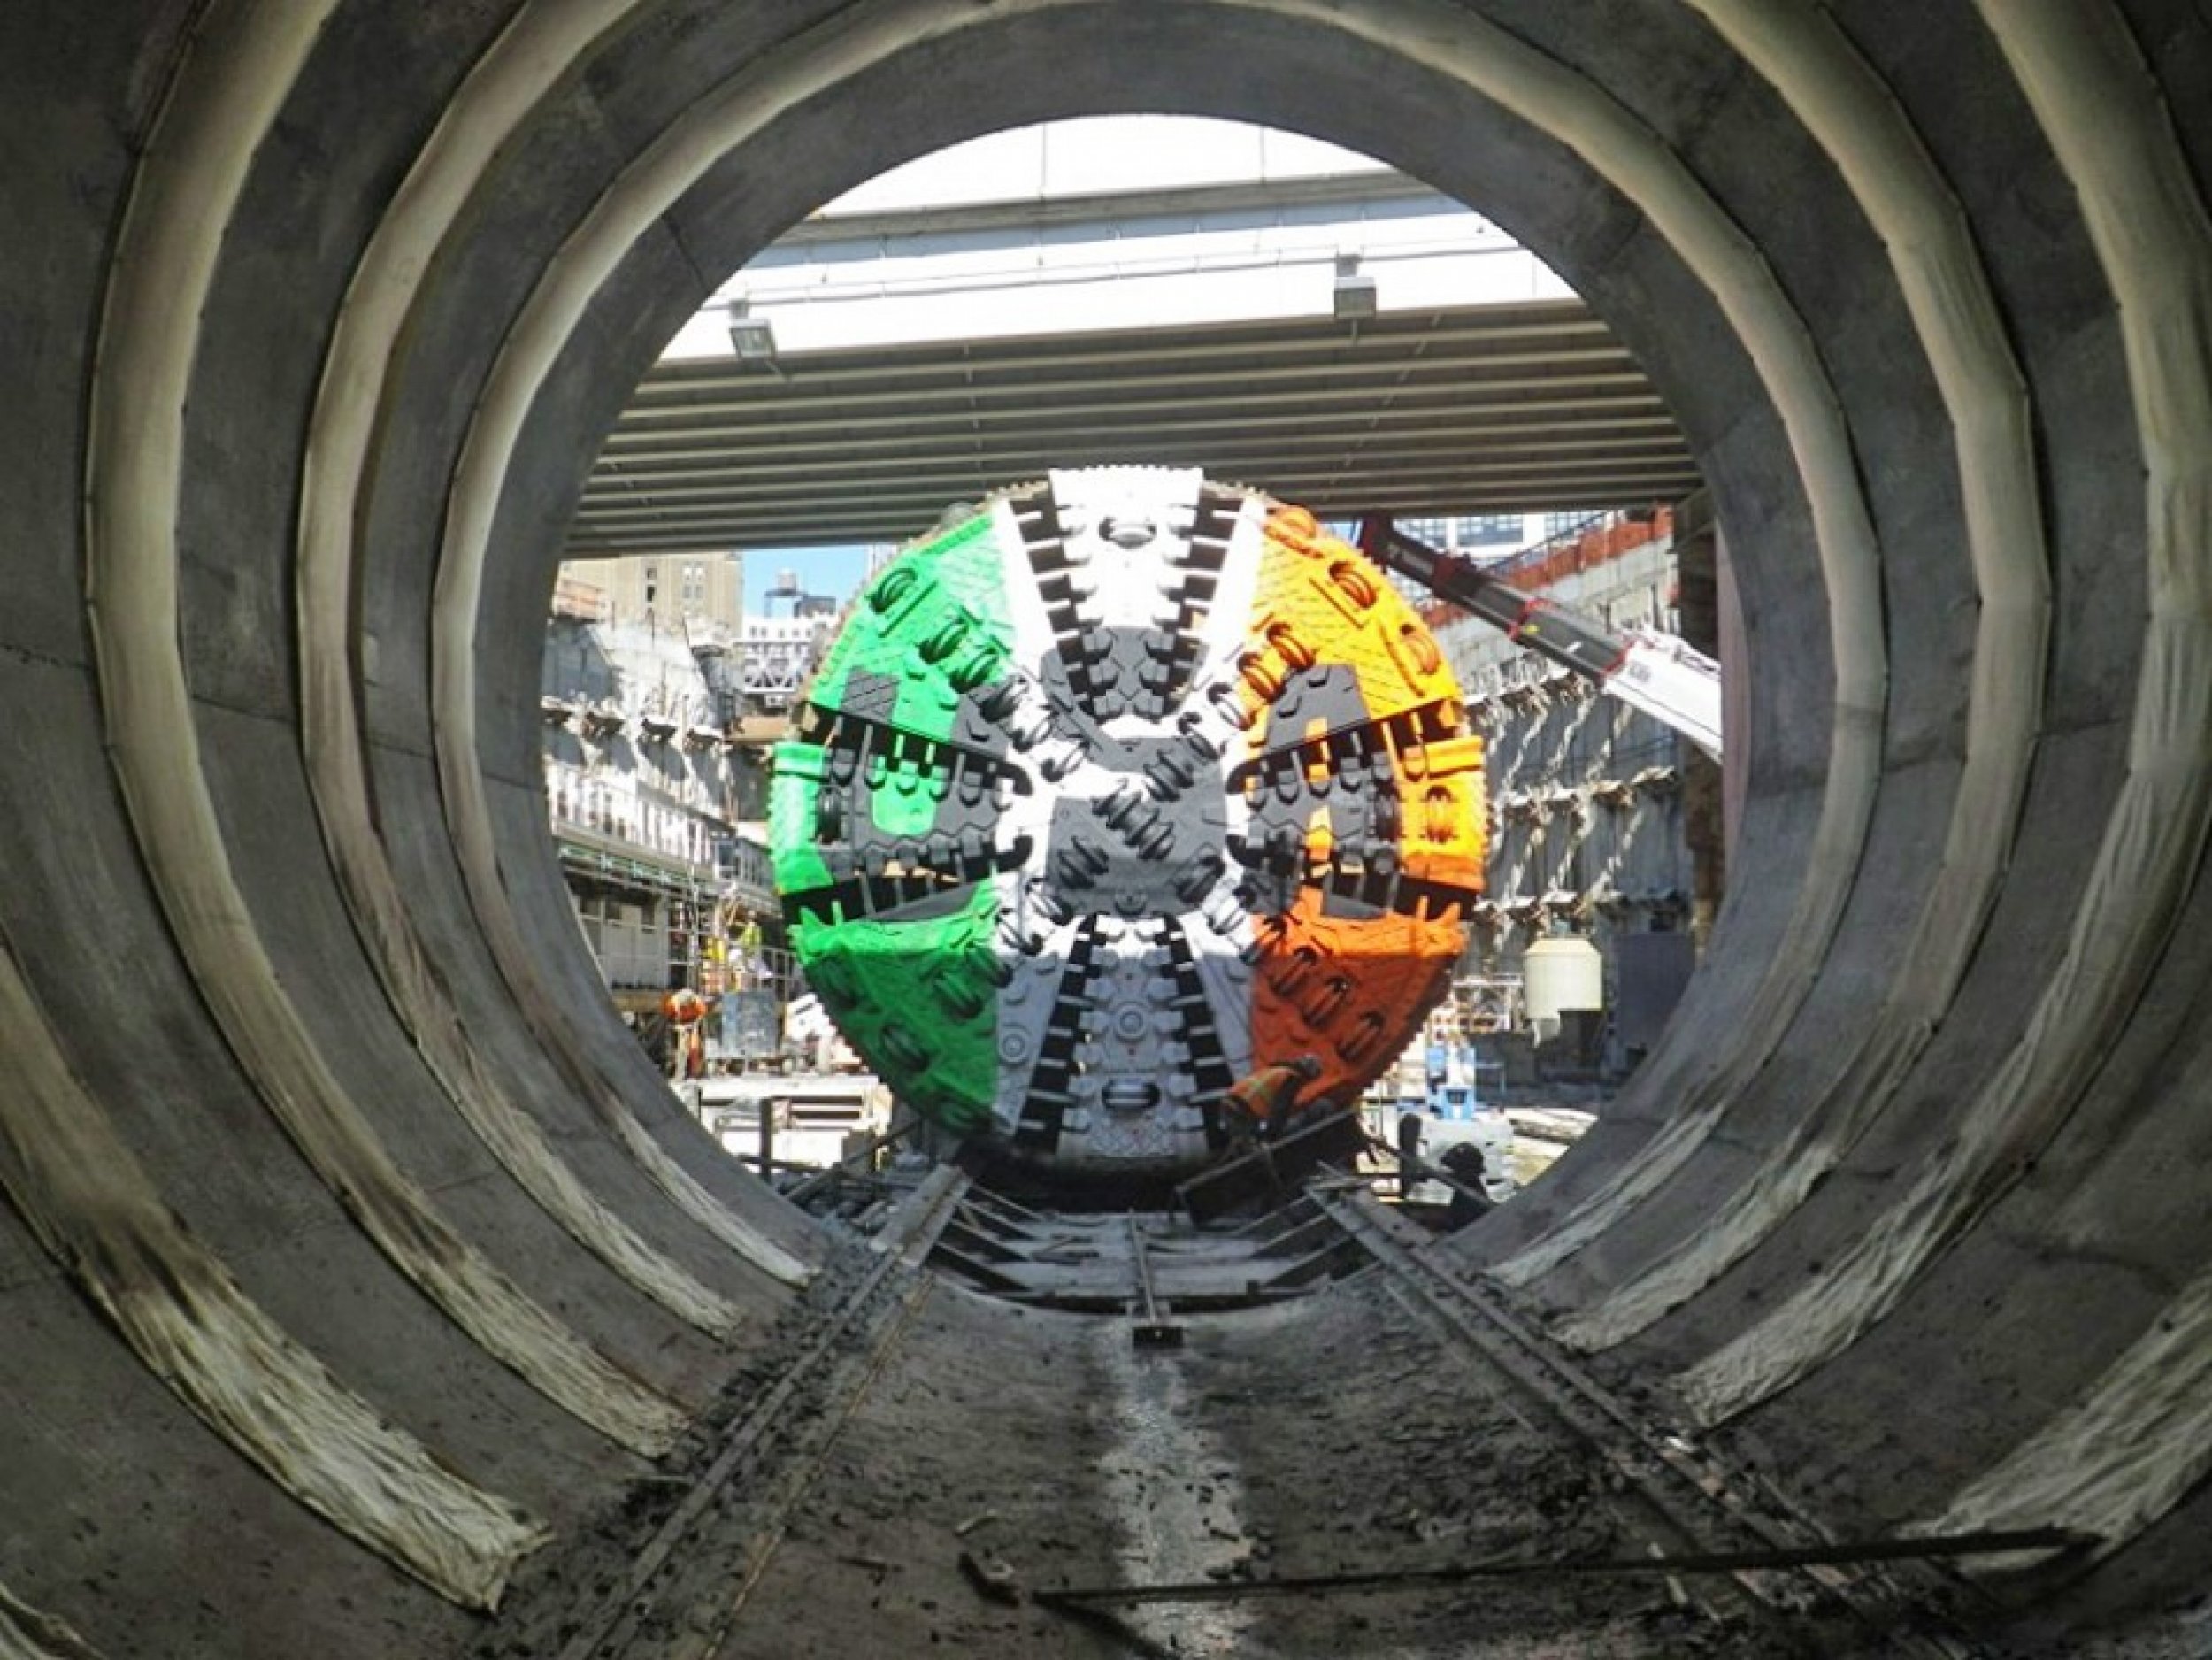 East Side Access Project